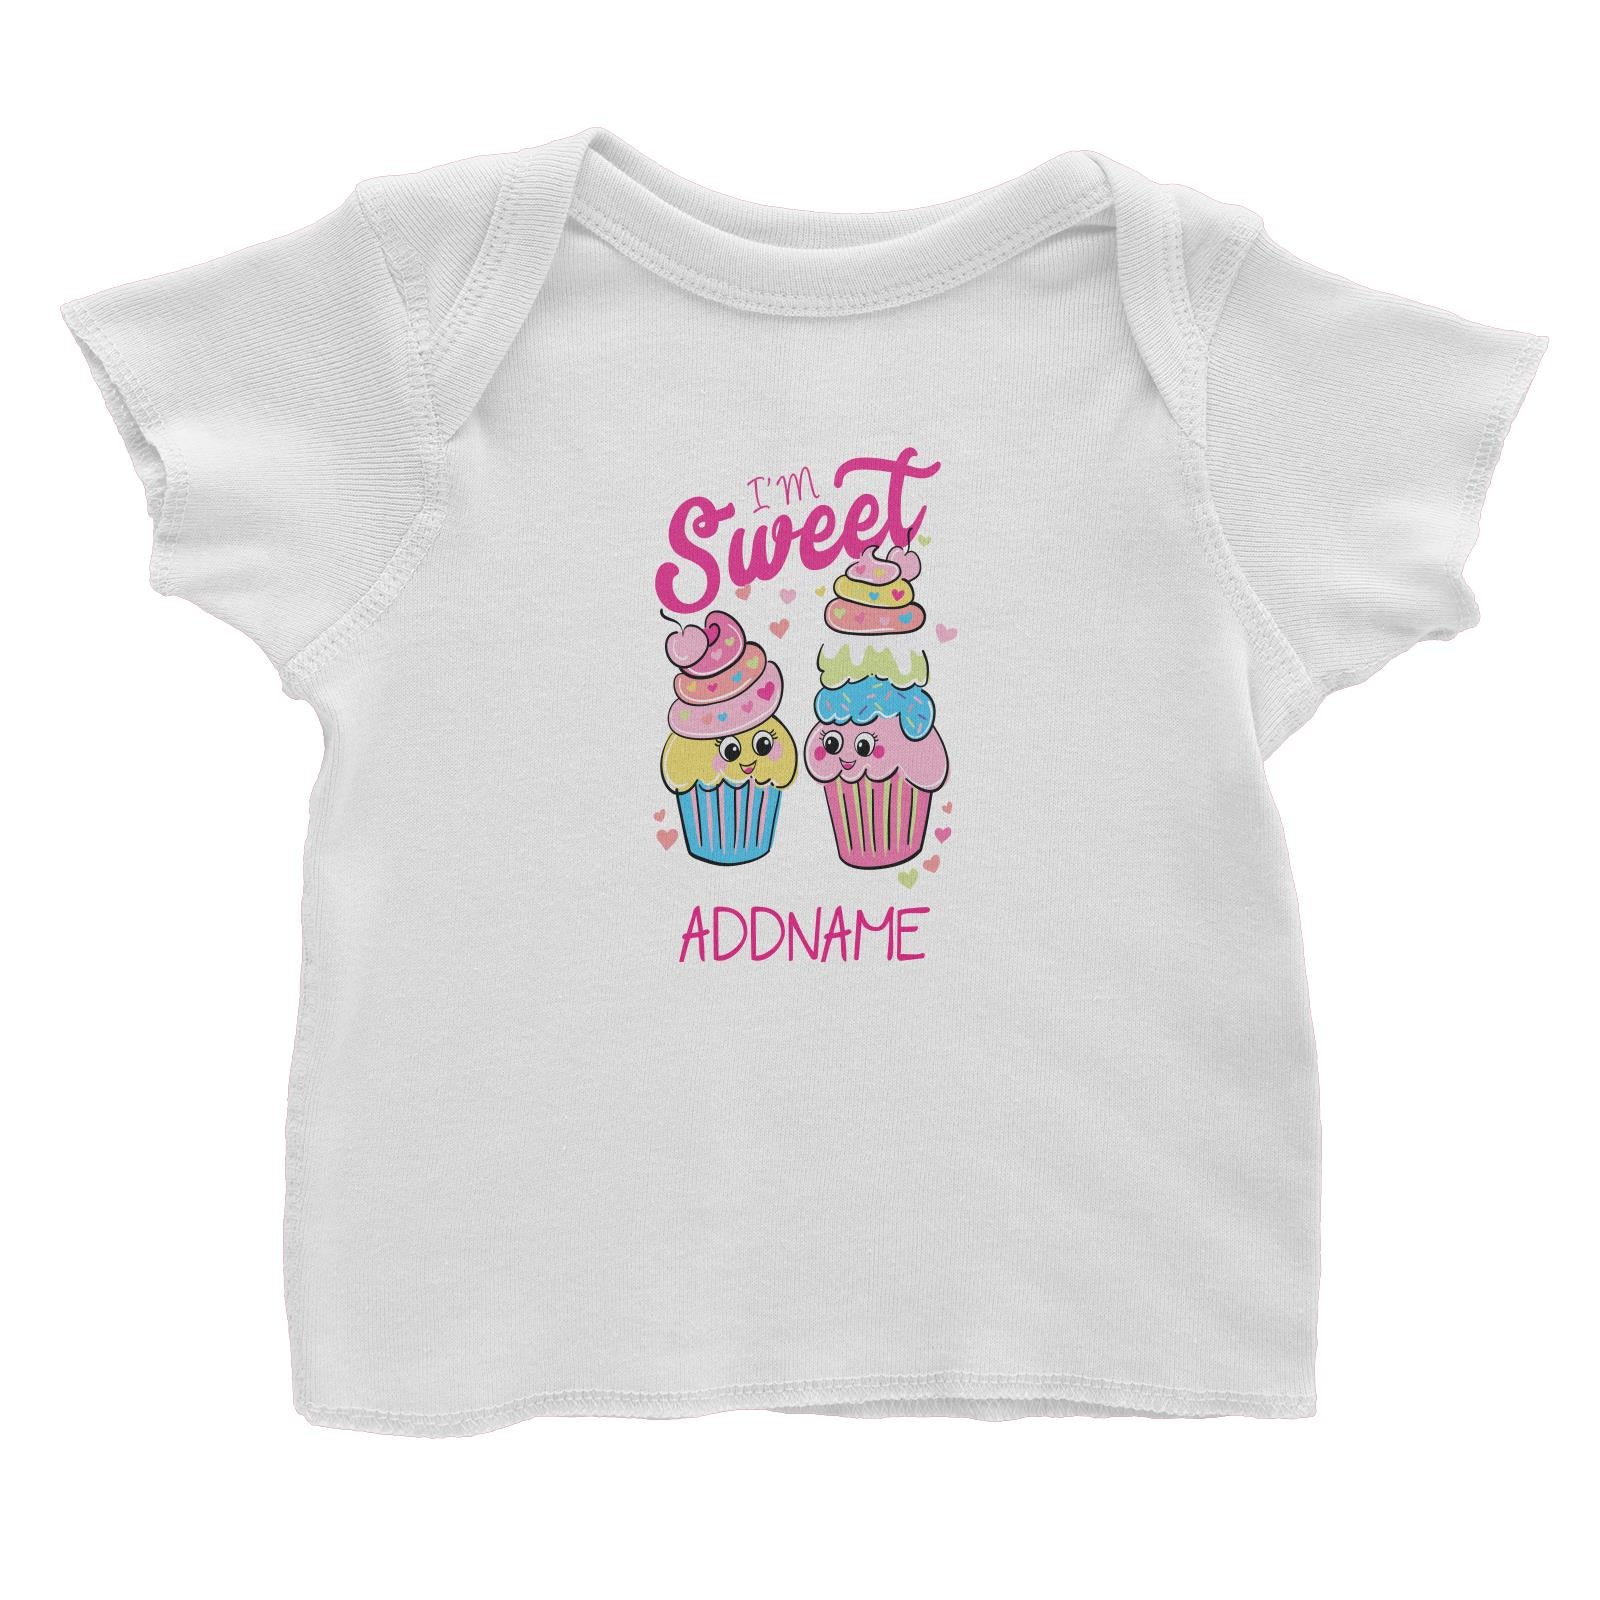 Cool Vibrant Series I'm Sweet Cupcakes Addname Baby T-Shirt [SALE]